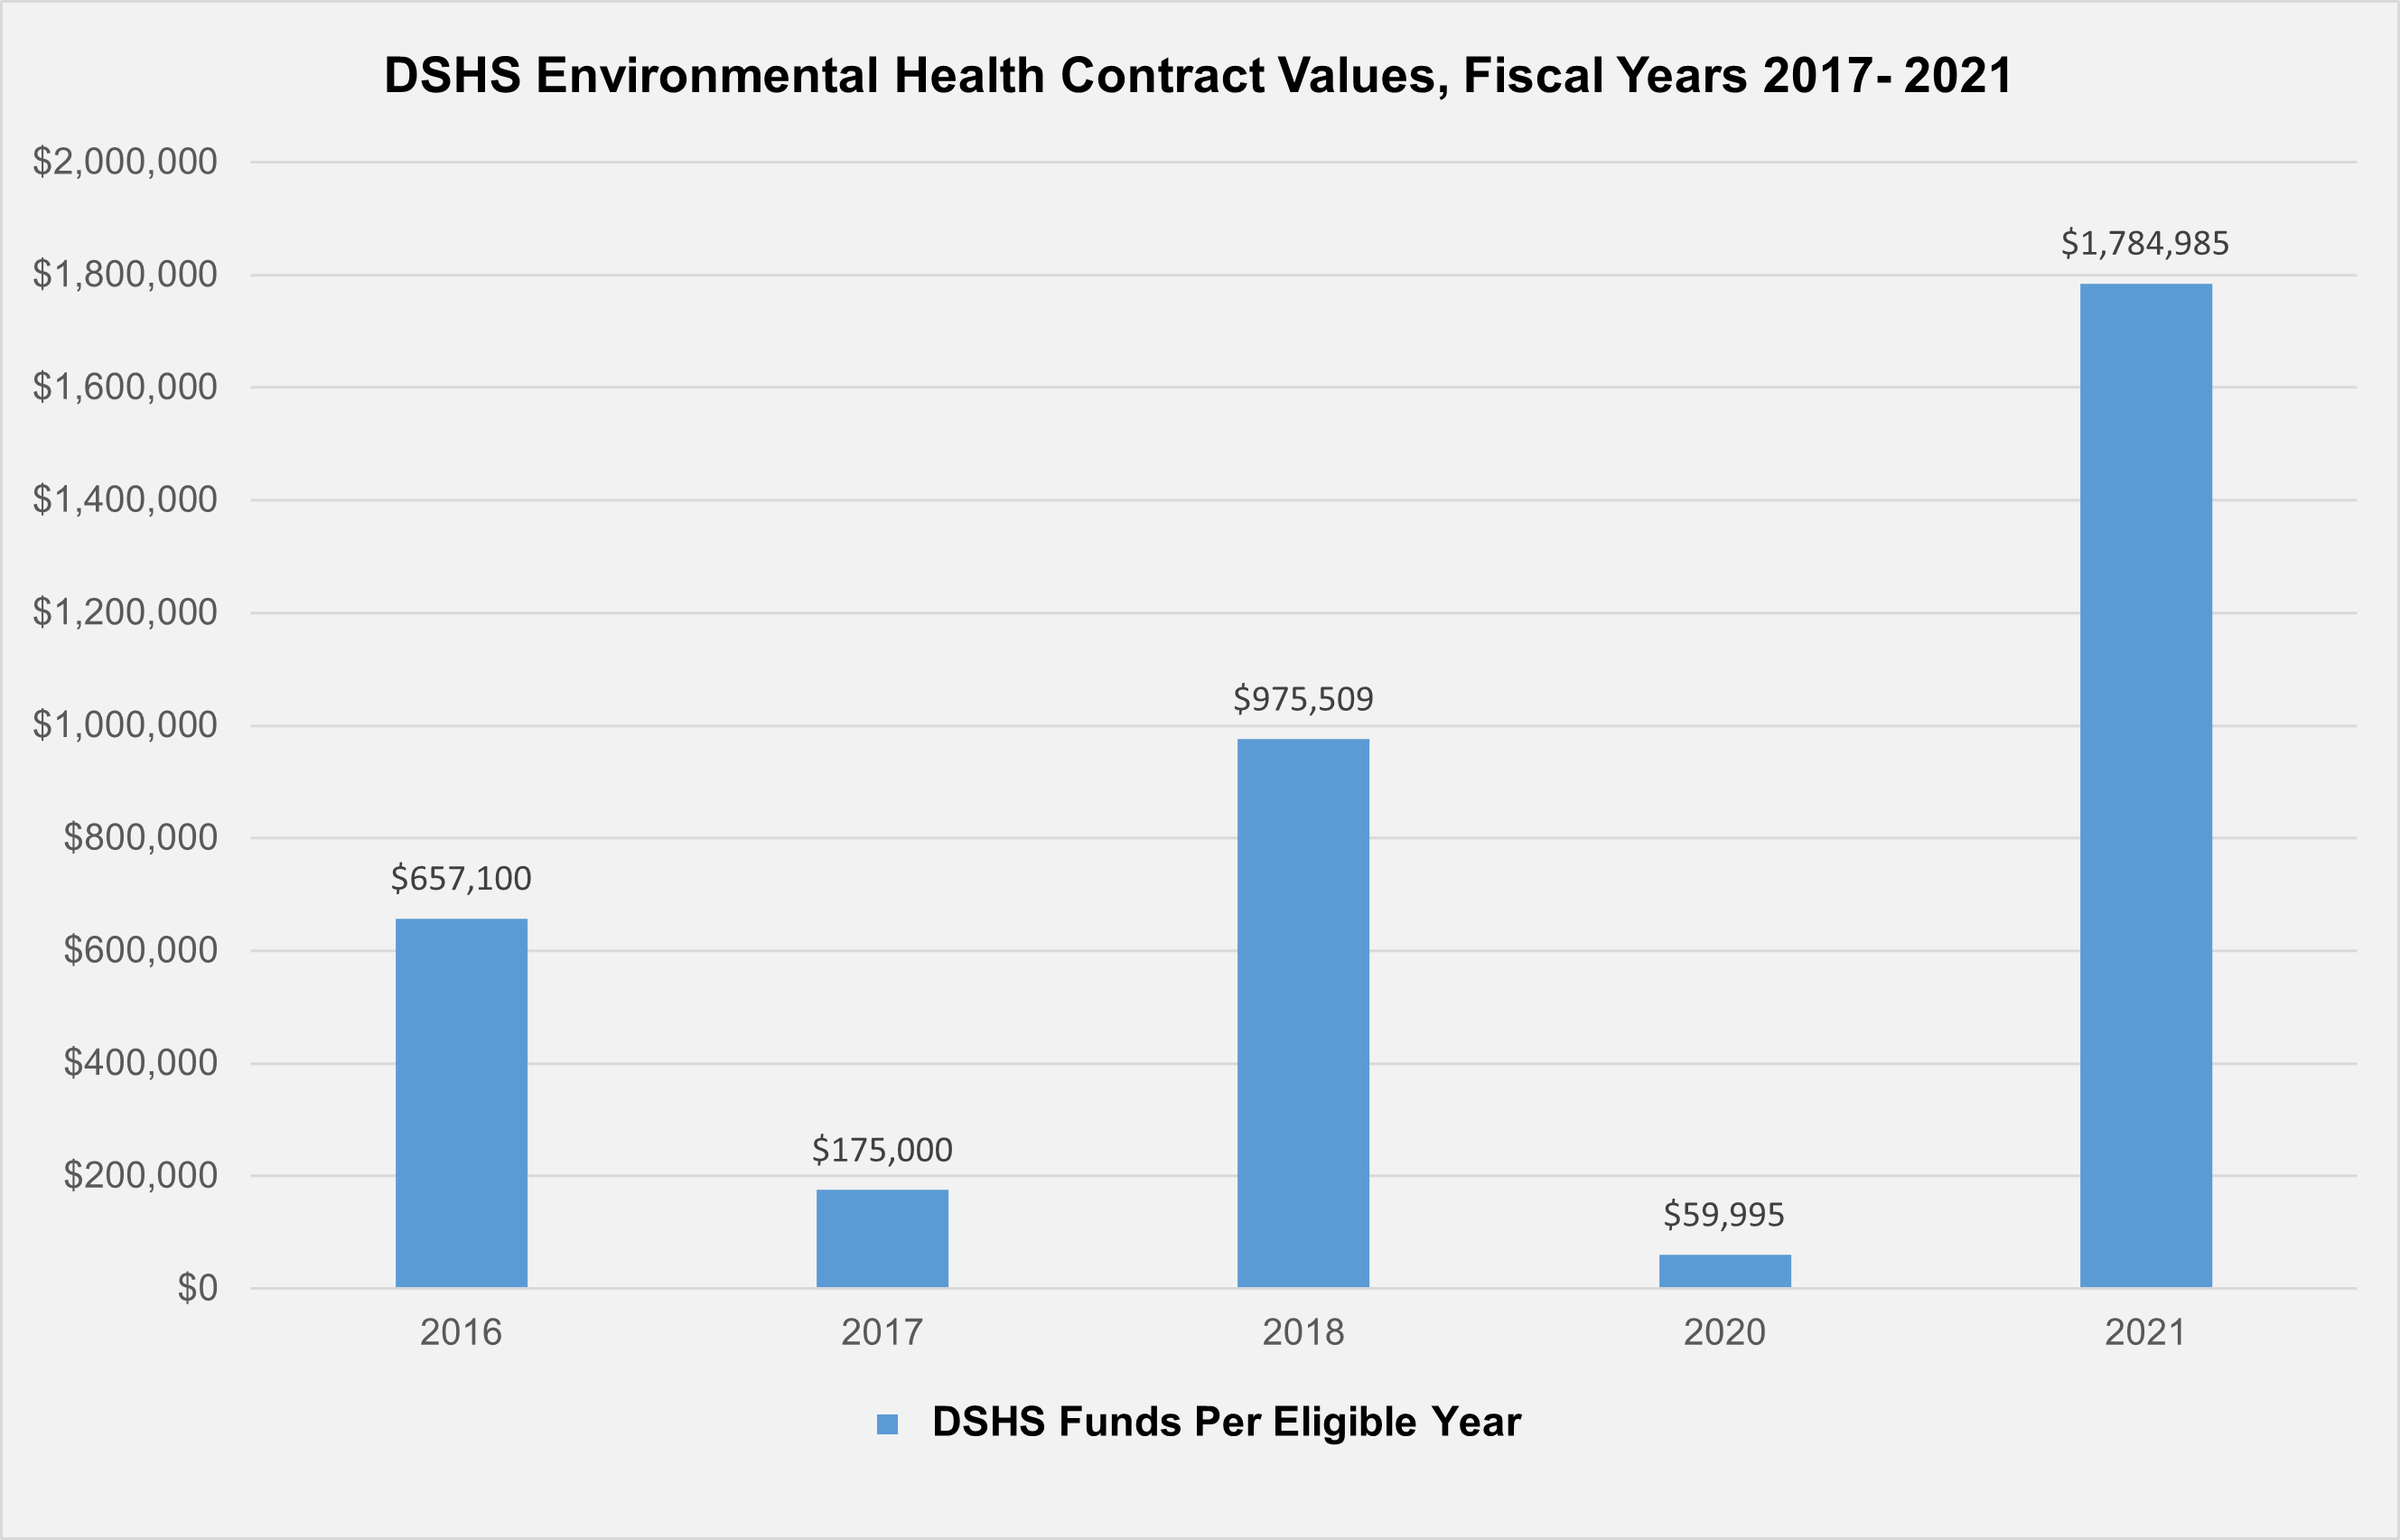 DSHS Environmental Health Contract Values for Fiscal Years 2017-2021